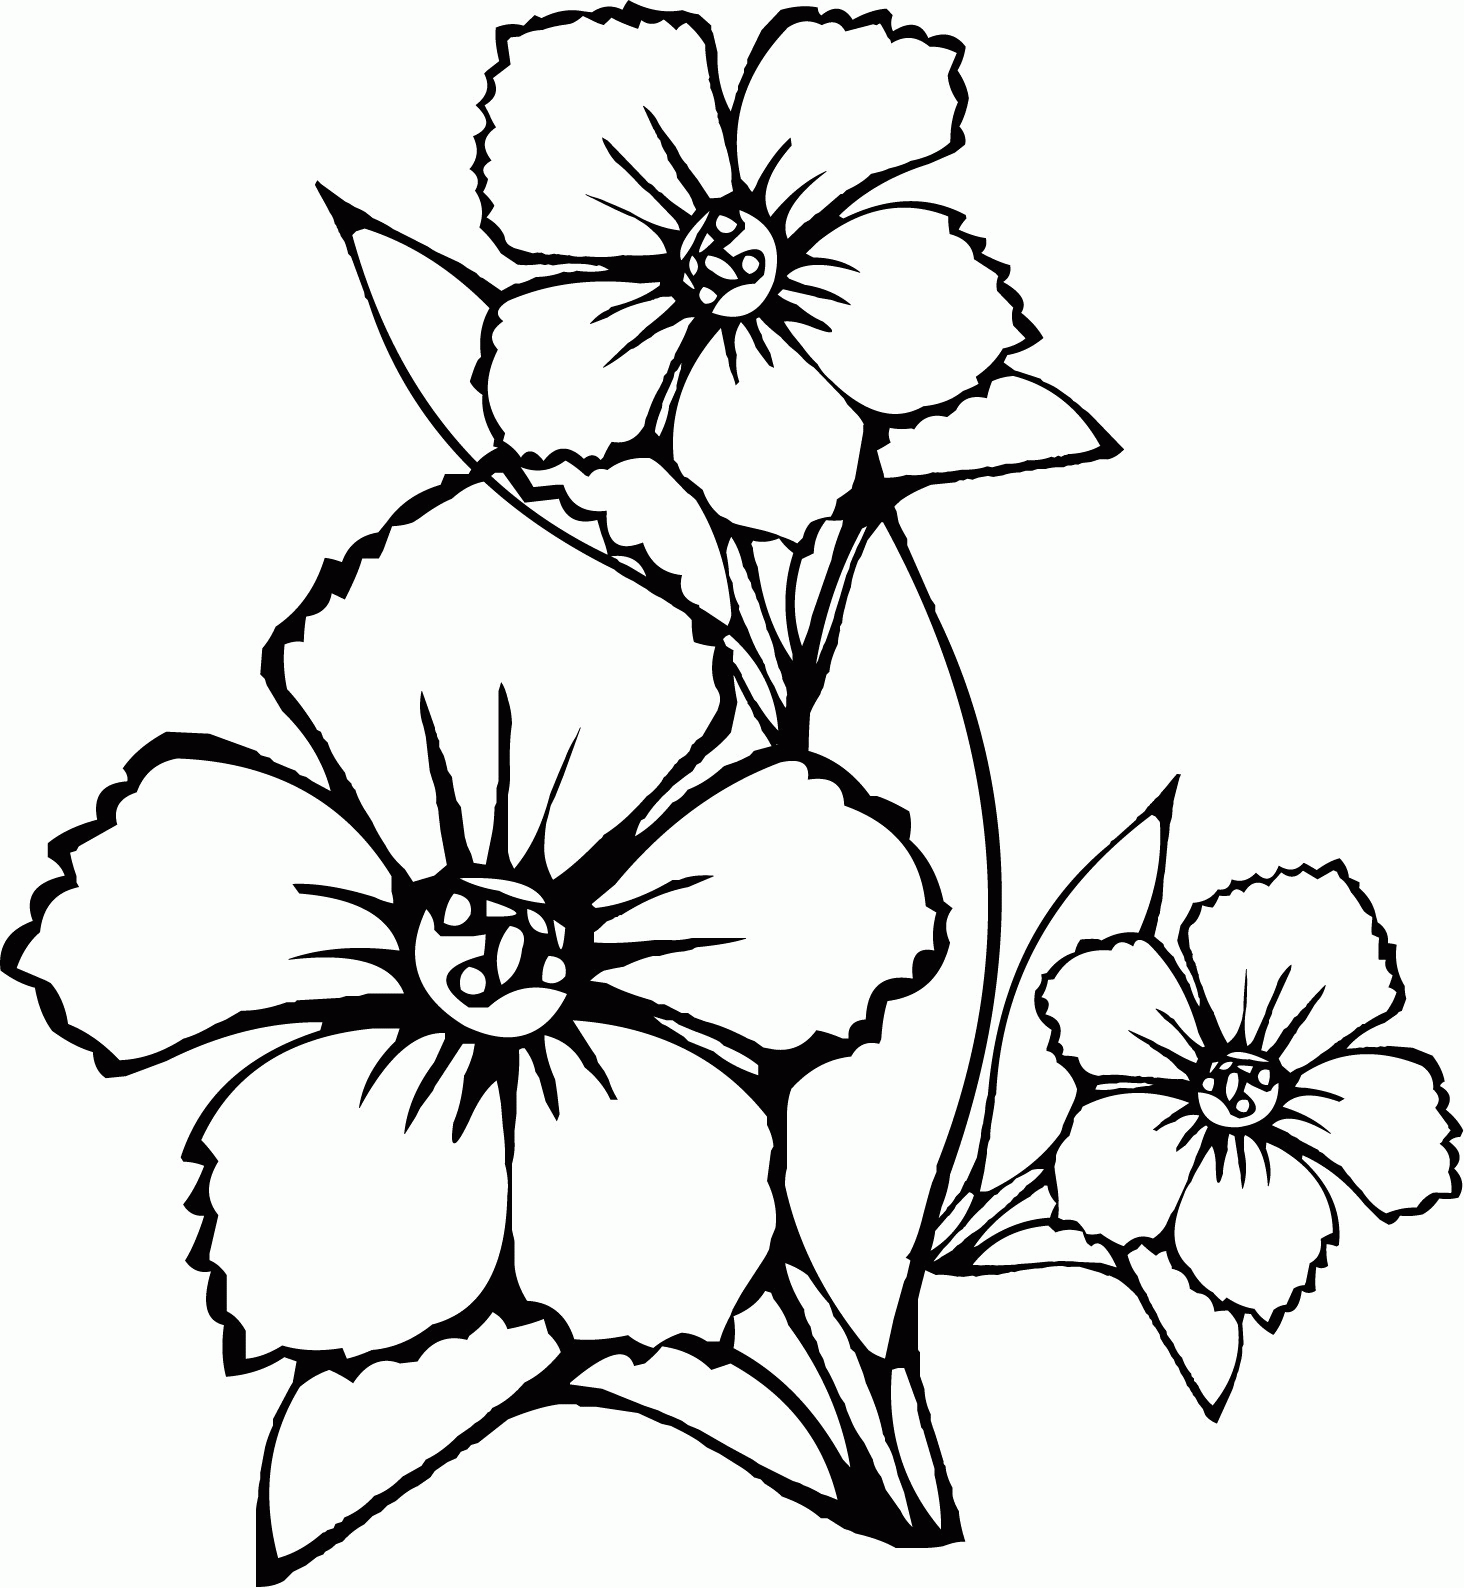 flower-coloring-pages-for-girls-10-and-up-2.jpg